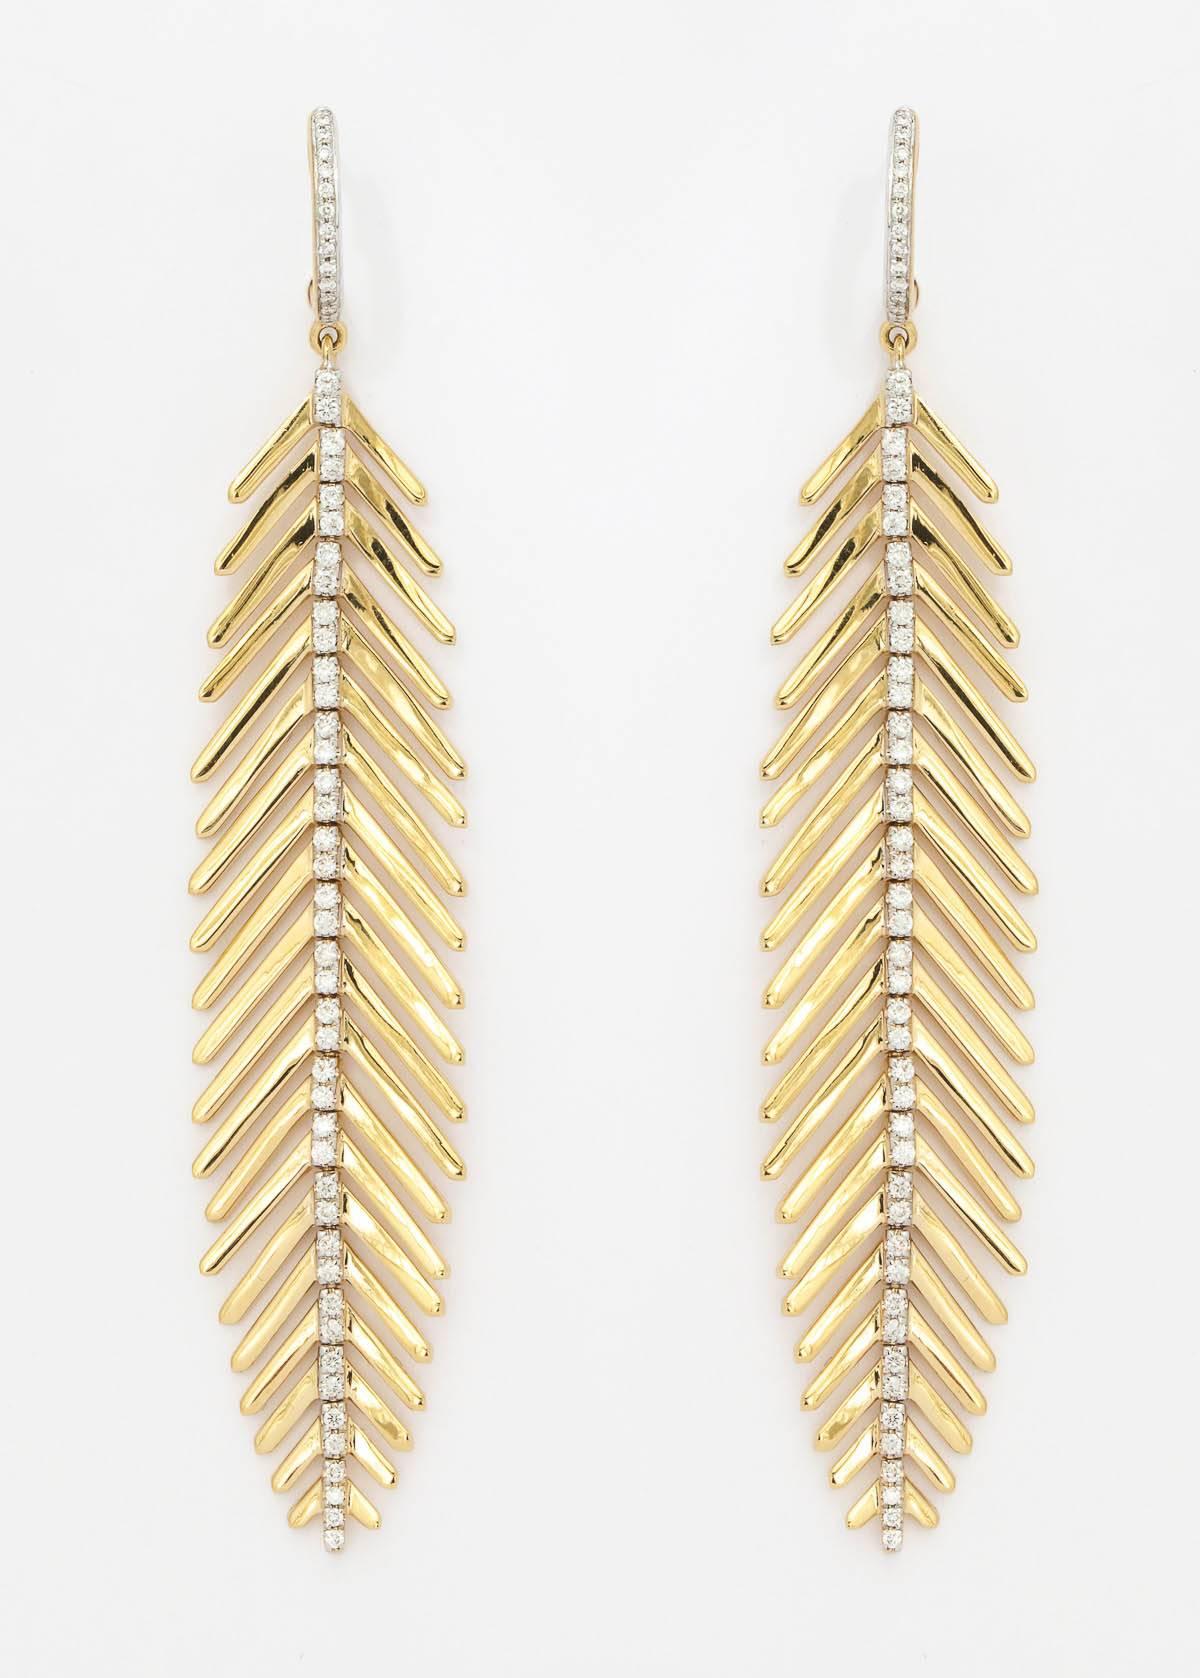 18k yellow gold and diamond spine articulated feather design earrings containing 110 full cut diamonds weighing 0.70 ct. total weight.  These earrings are 3" in length .